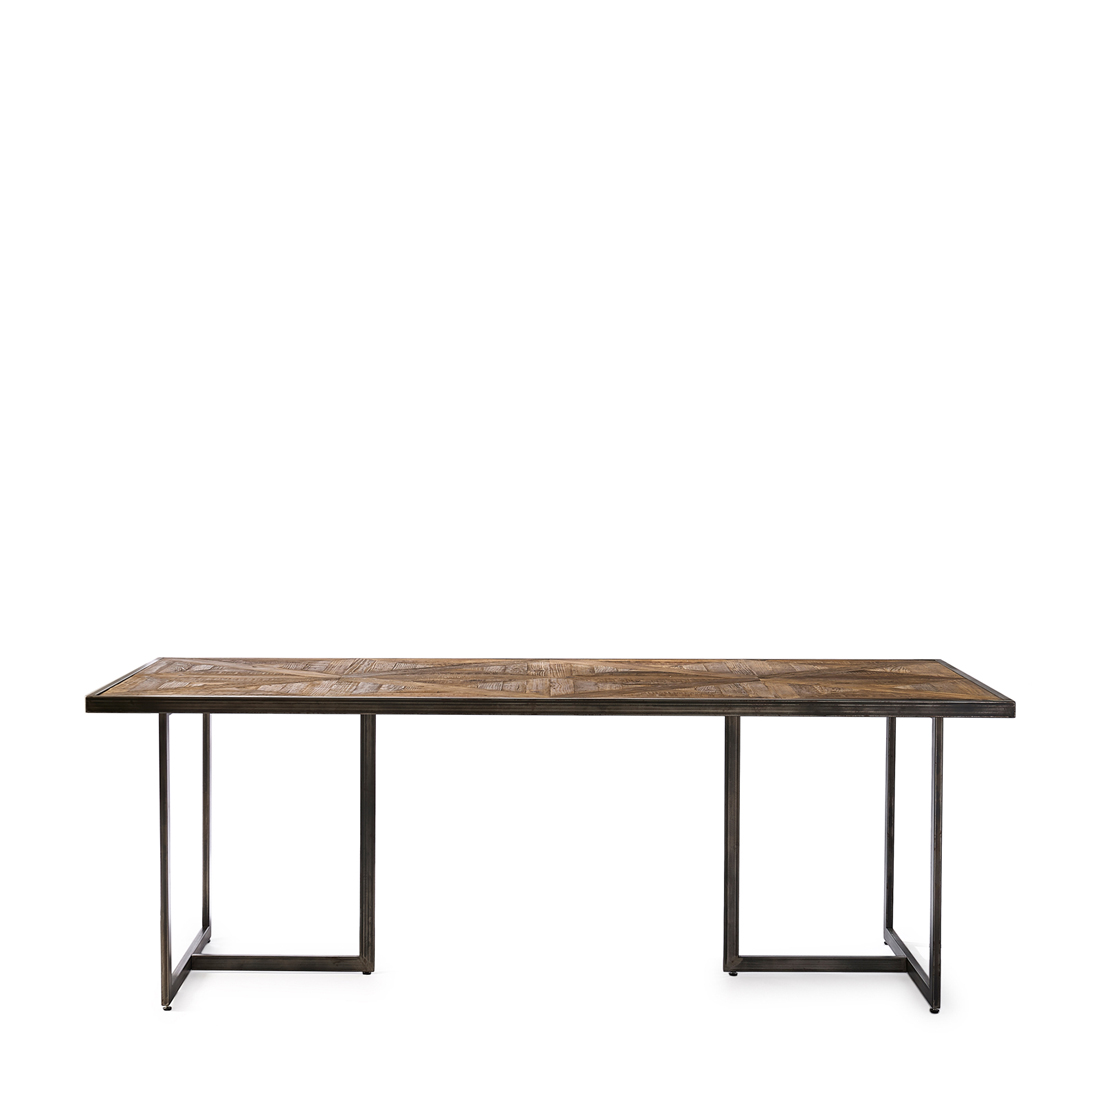 Le Bar American Dining Table 220x90